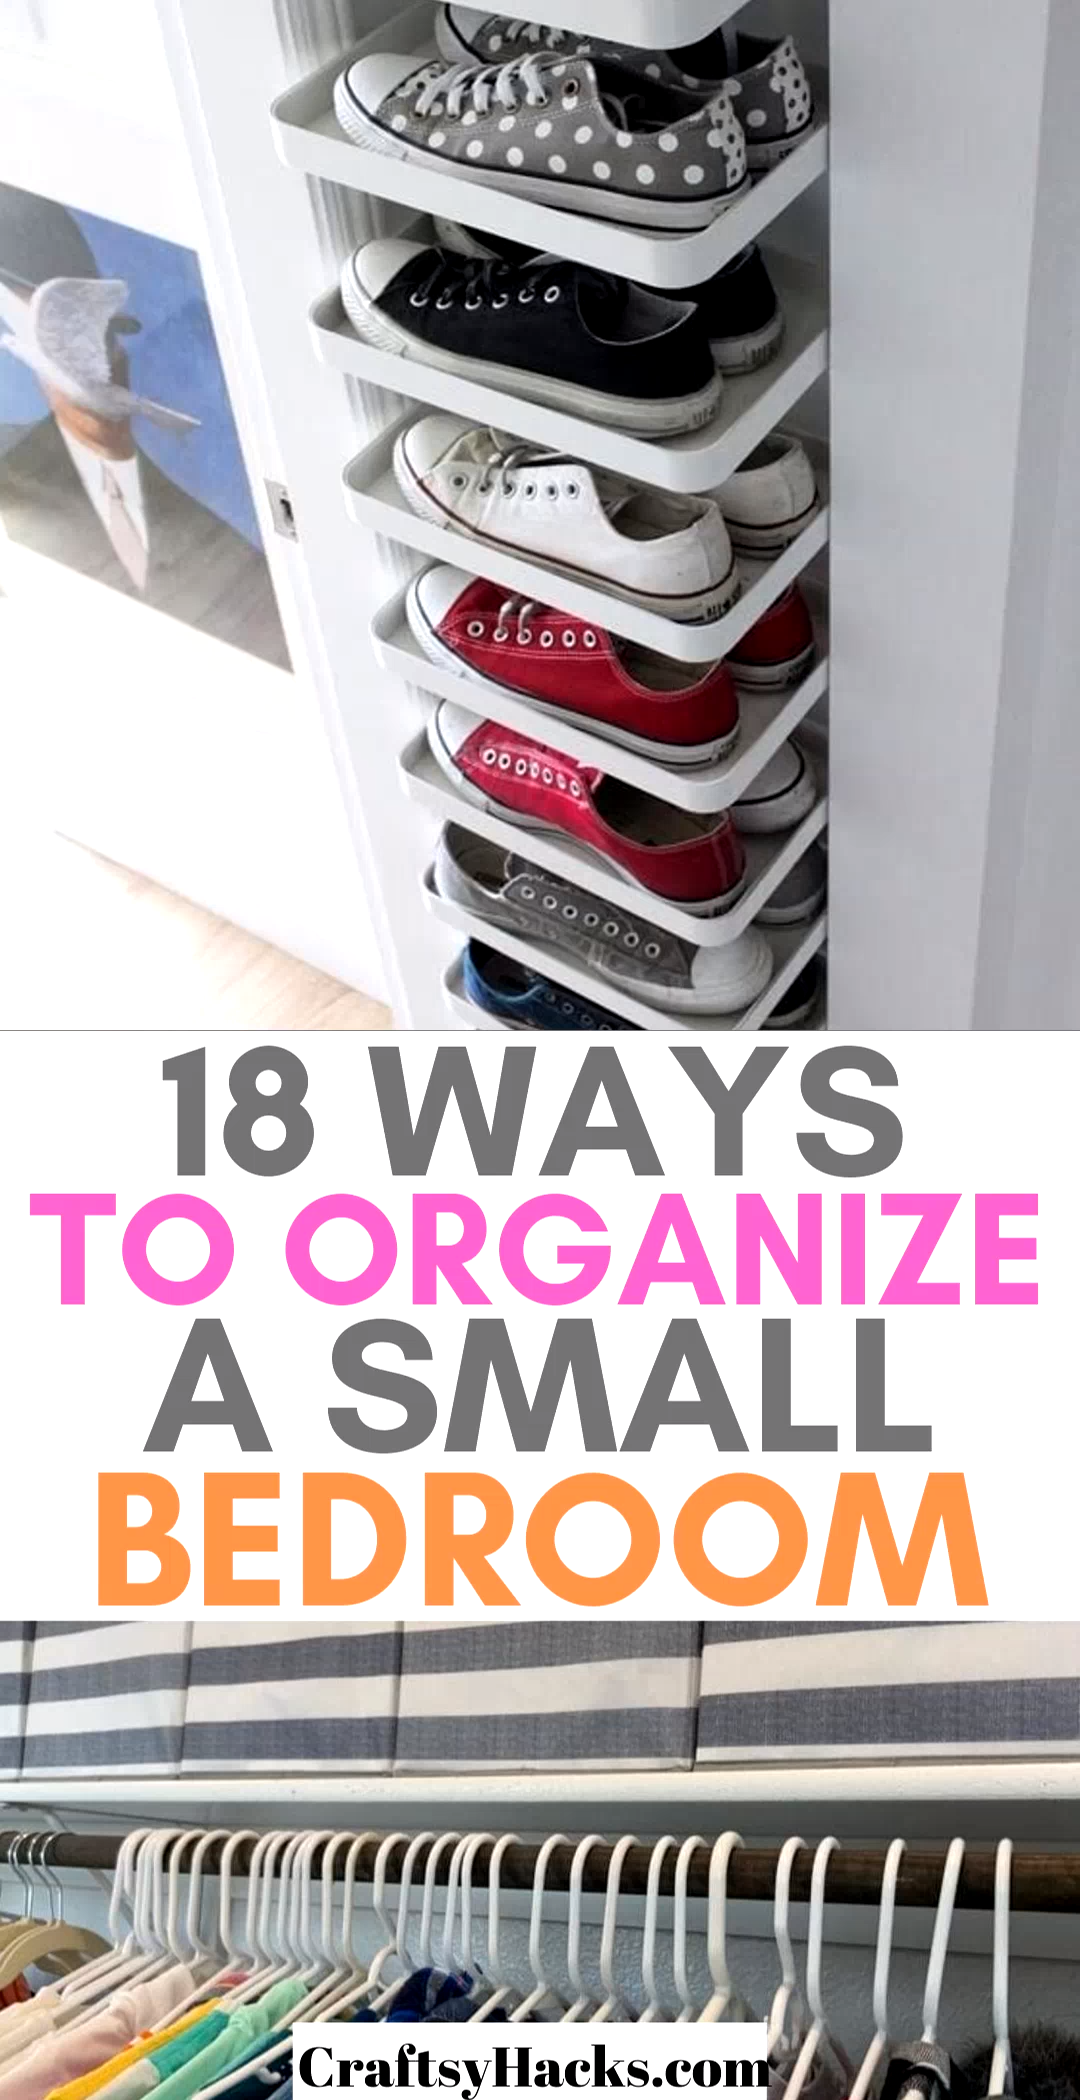 18 Ways to Organize a Small Bedroom - 18 Ways to Organize a Small Bedroom -   diy Organization hacks